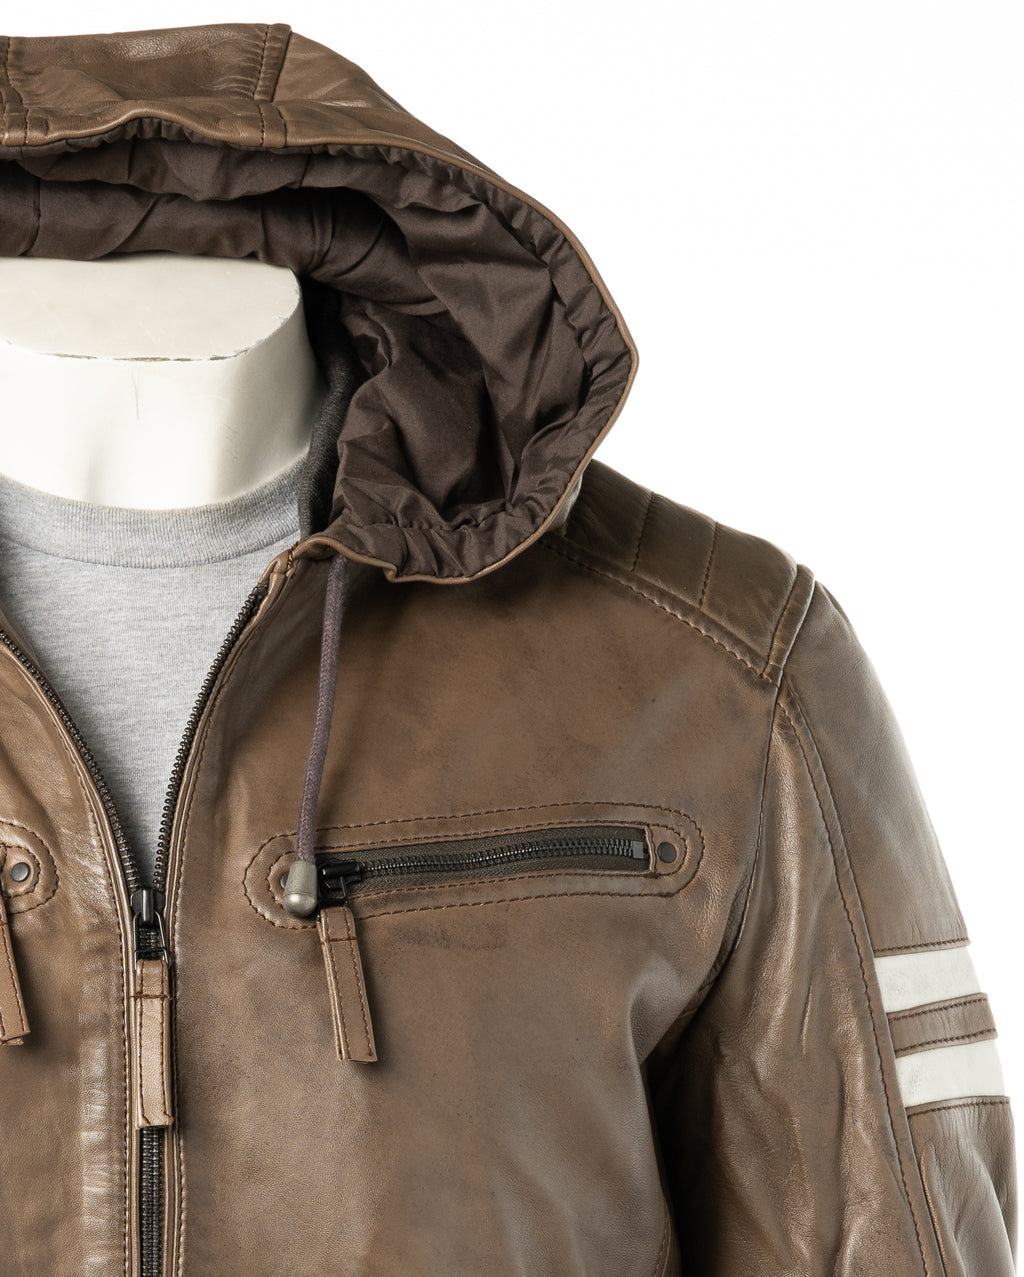 Men's Brown Hooded Contrast Panelled Racer Style Leather Jacket: Rolando